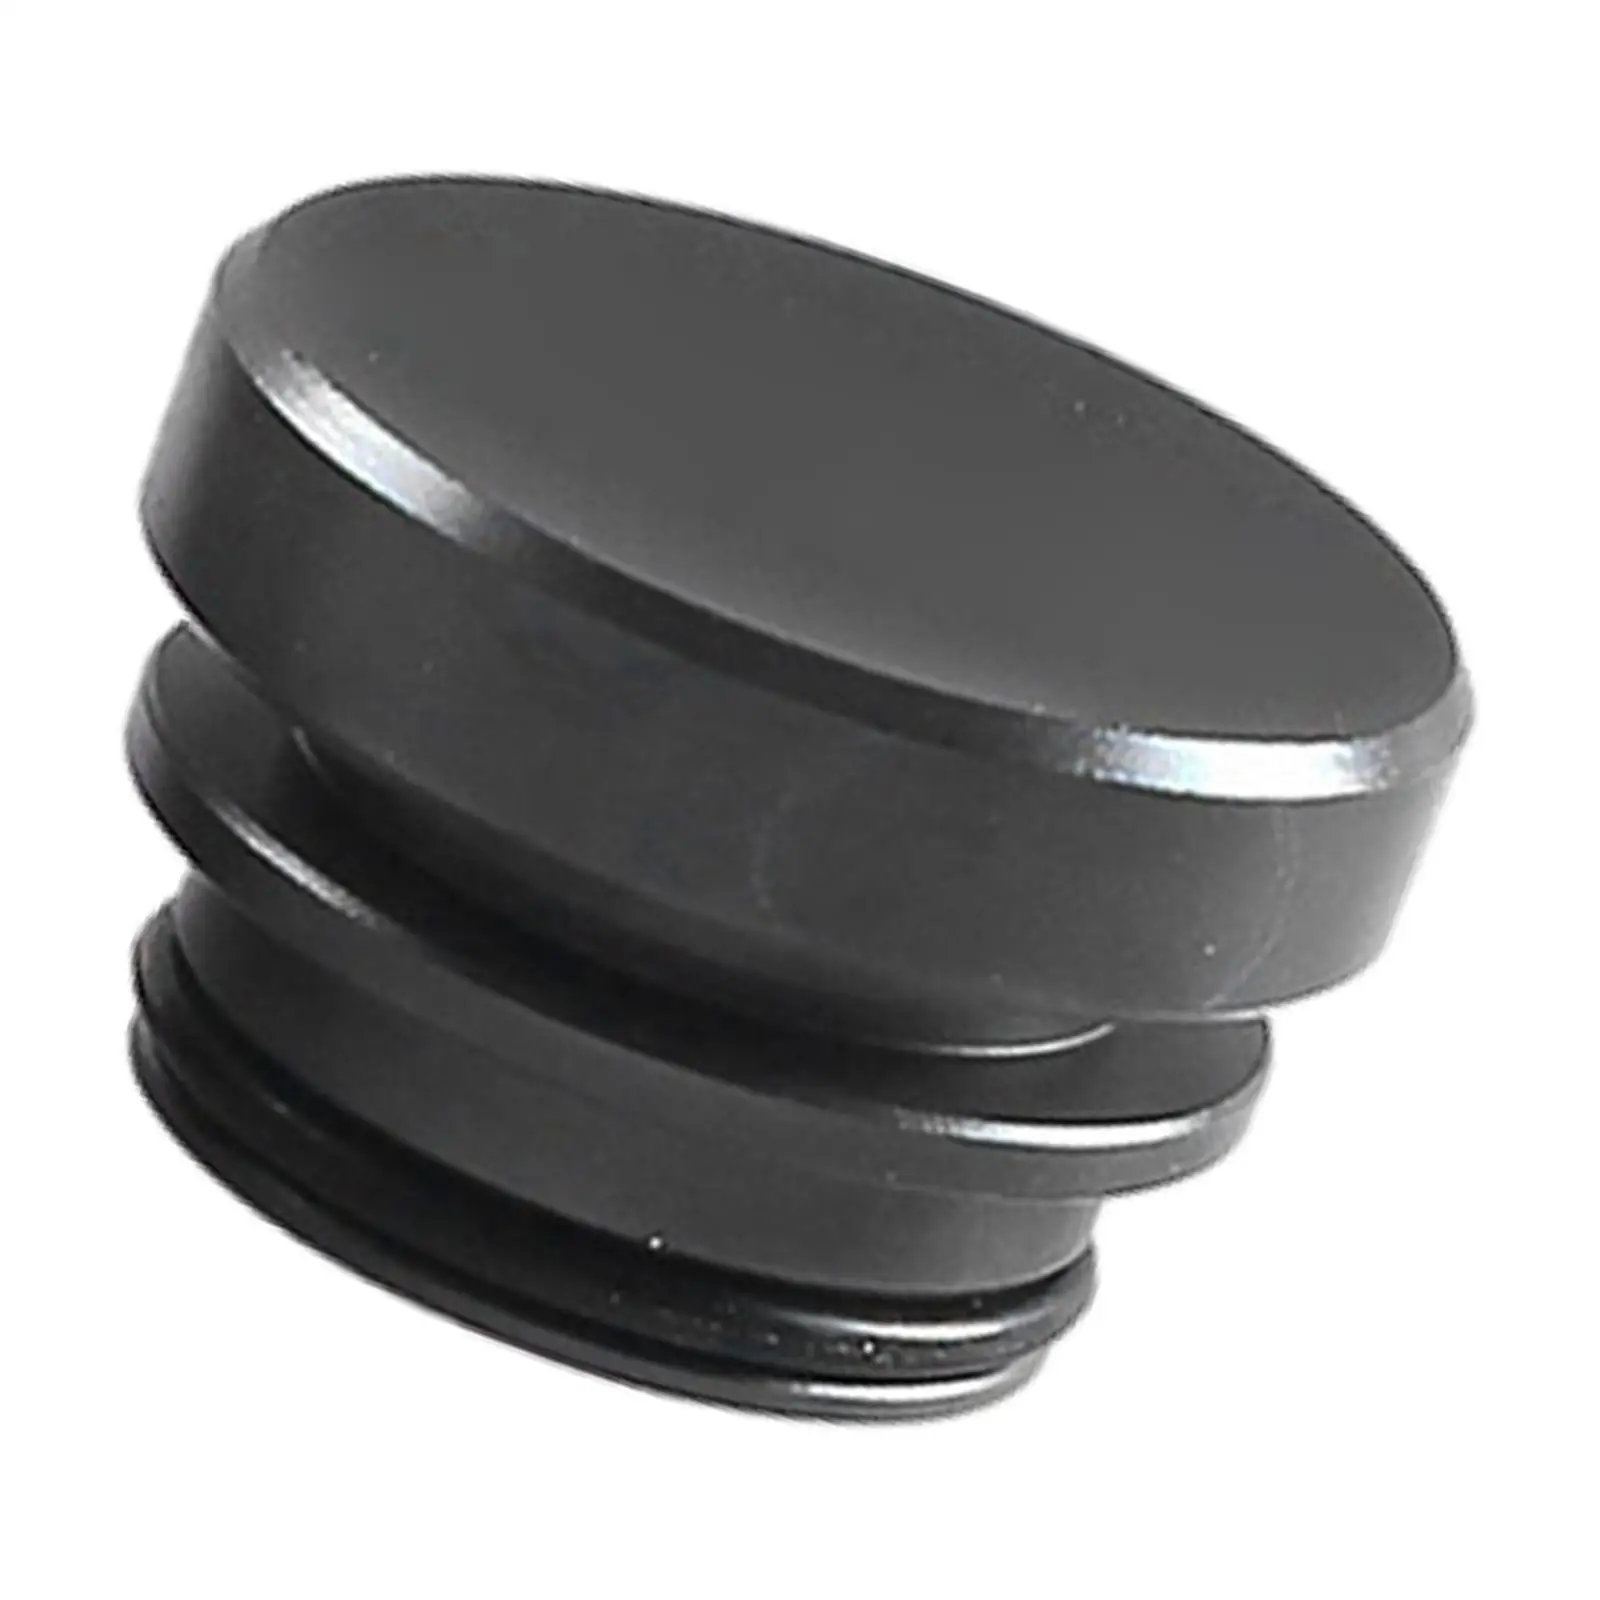 Cigarette Lighter Plugs Cover Fit for Most Automotive Vehicles with Standard 12V Power Source